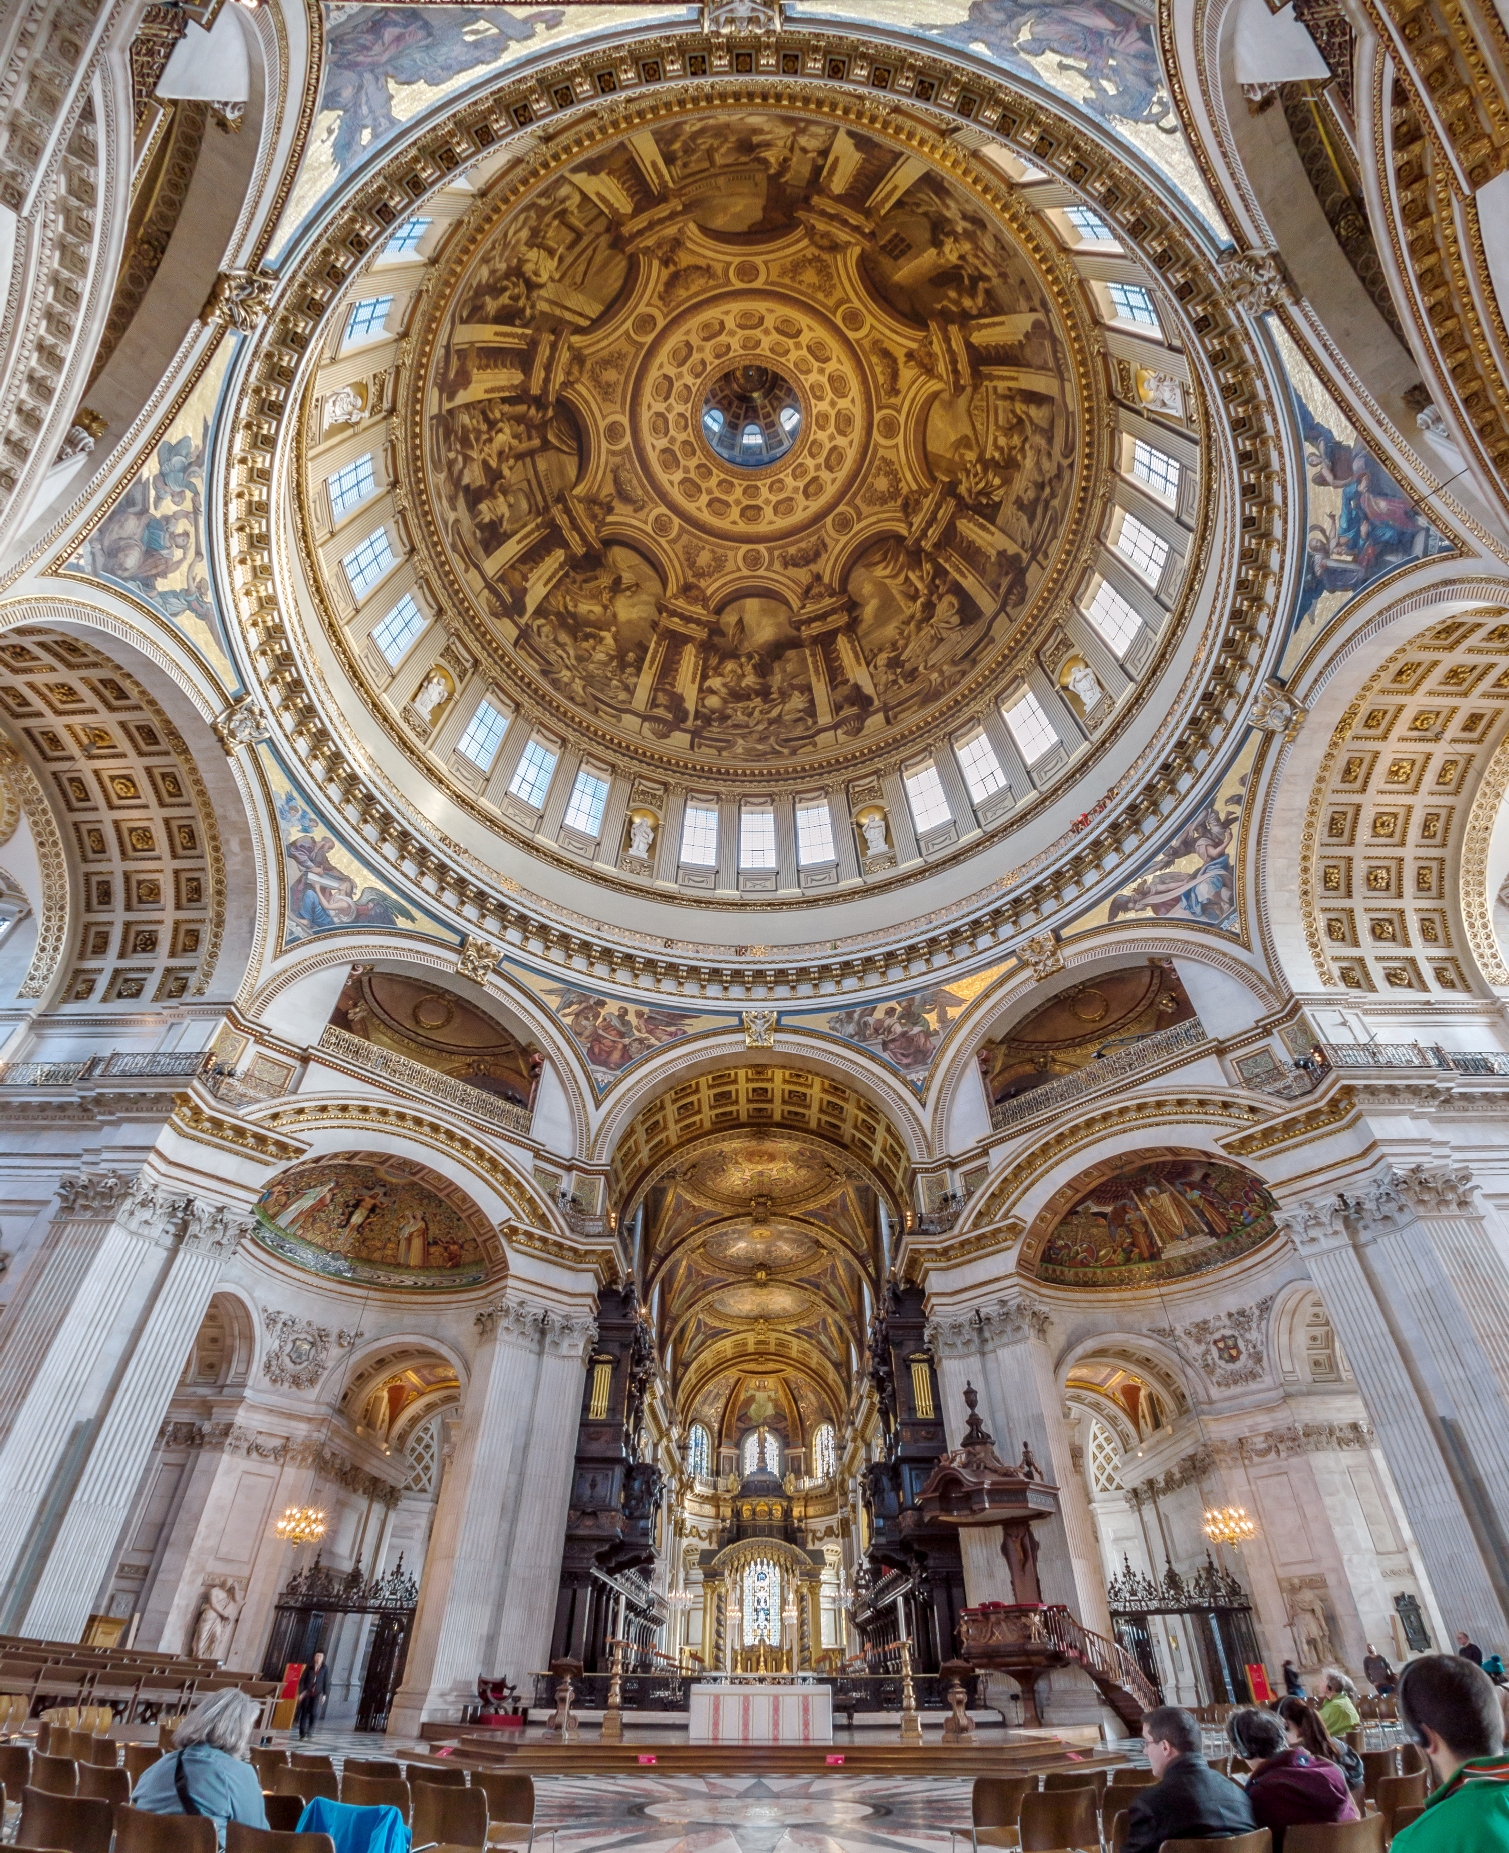 Amazing St Paul's Cathedral Pictures & Backgrounds